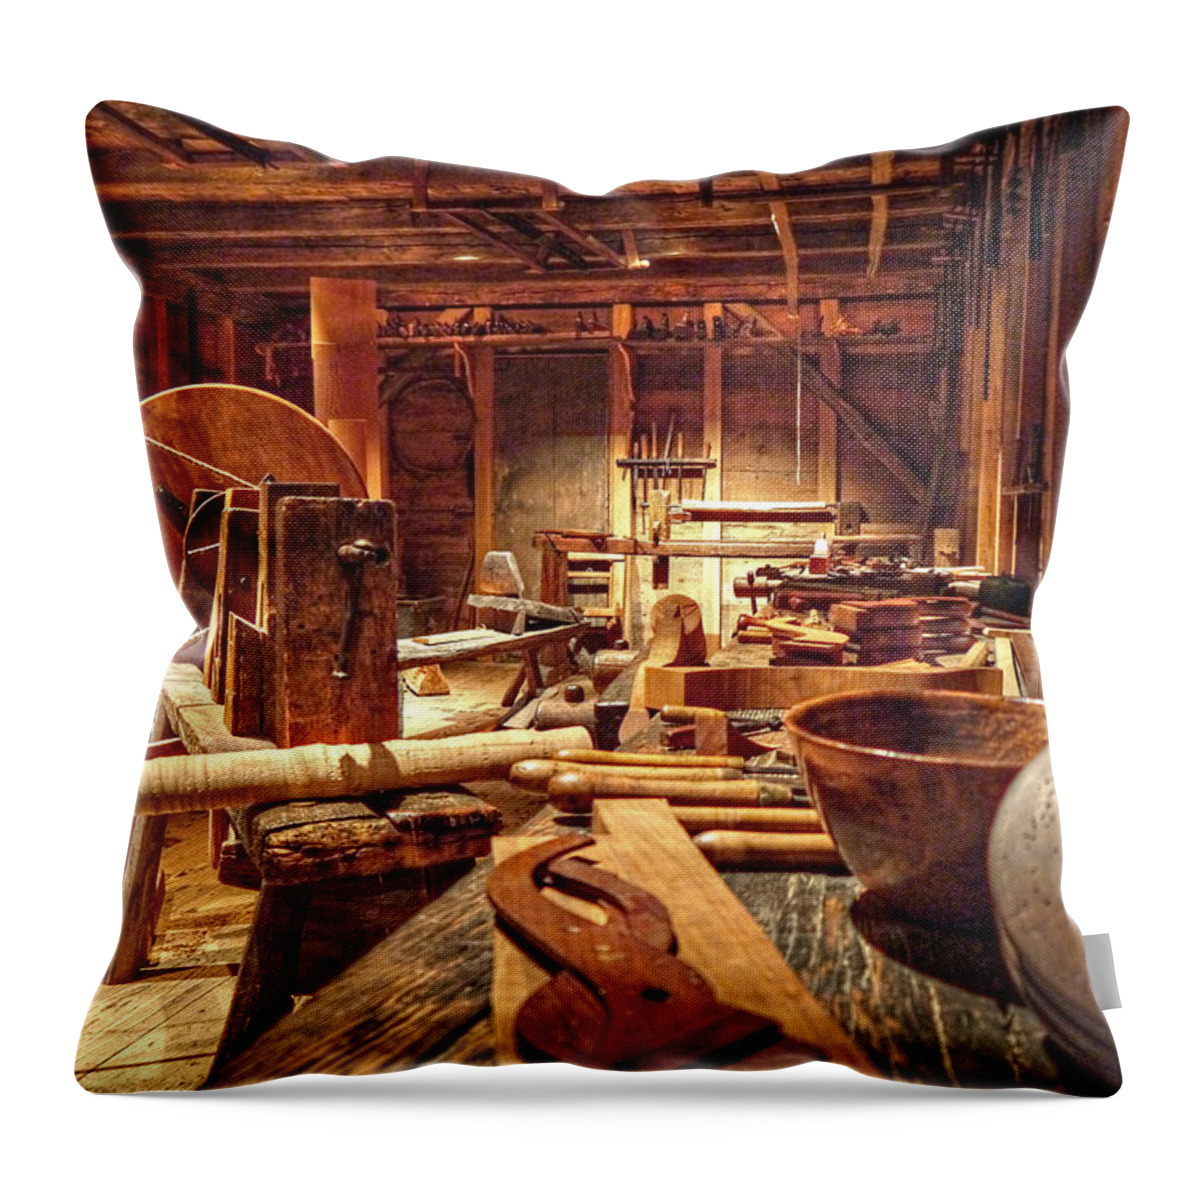 Hdr Throw Pillow featuring the photograph The Carpenter's Tools by Richard Reeve